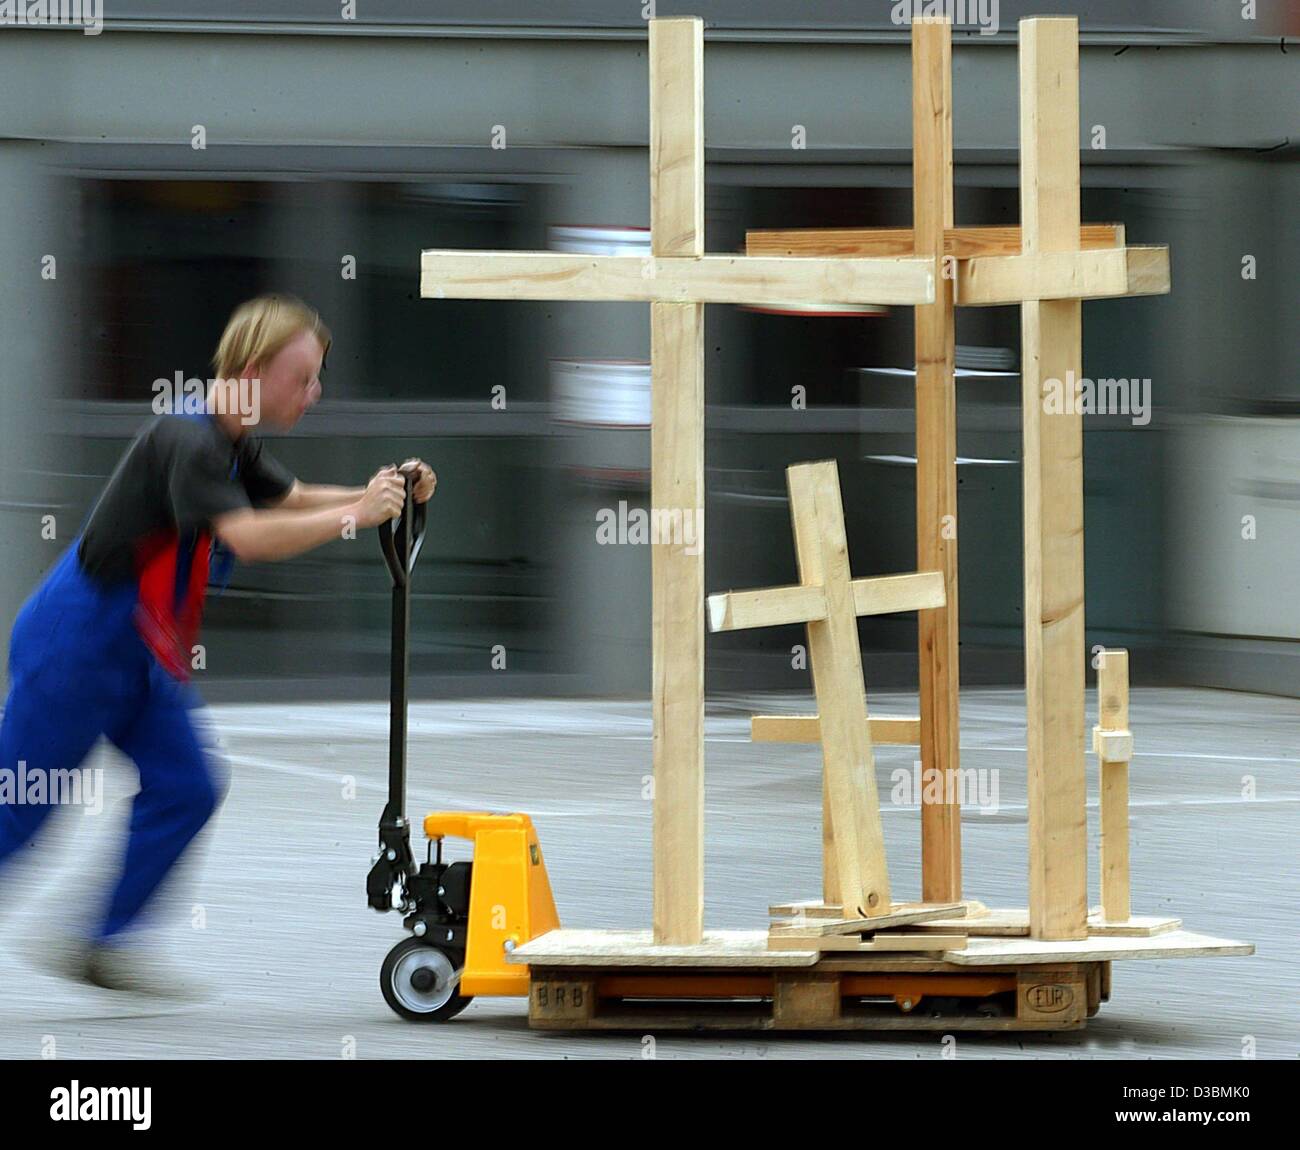 (dpa) - A worker rushes wooden crosses to the venue where the oecumenic church congress is to take place, in Berlin, 22 May 2003. About 200,000 participants are expected to take part in the church congress from 28 May to 1 June. Hotels in Berlin are already booked out during this period. Stock Photo